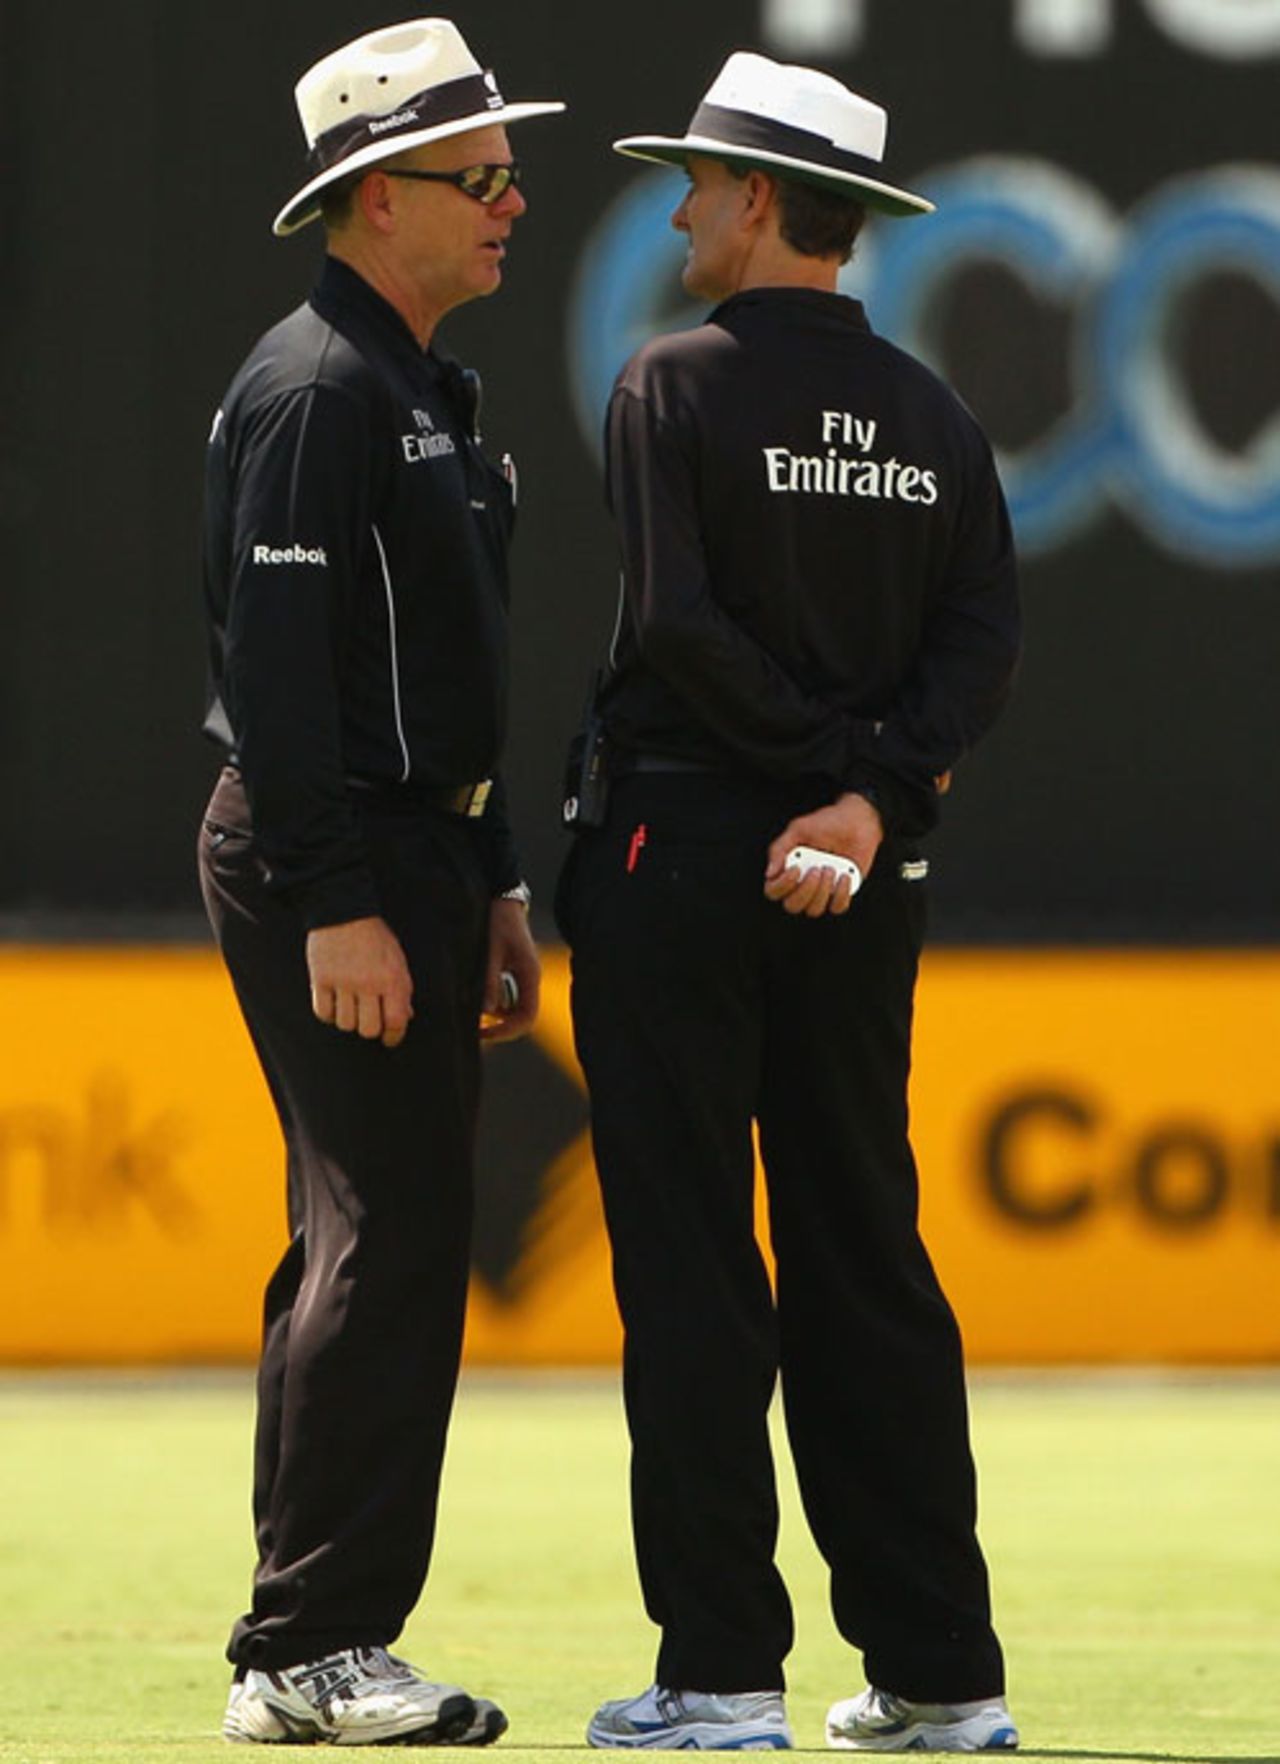 Billy Bowden explains his slow thinking on the Narsingh Deonarine decision to Bruce Oxenford, Australia v West Indies, 2nd ODI, Adelaide, 9 February, 2010